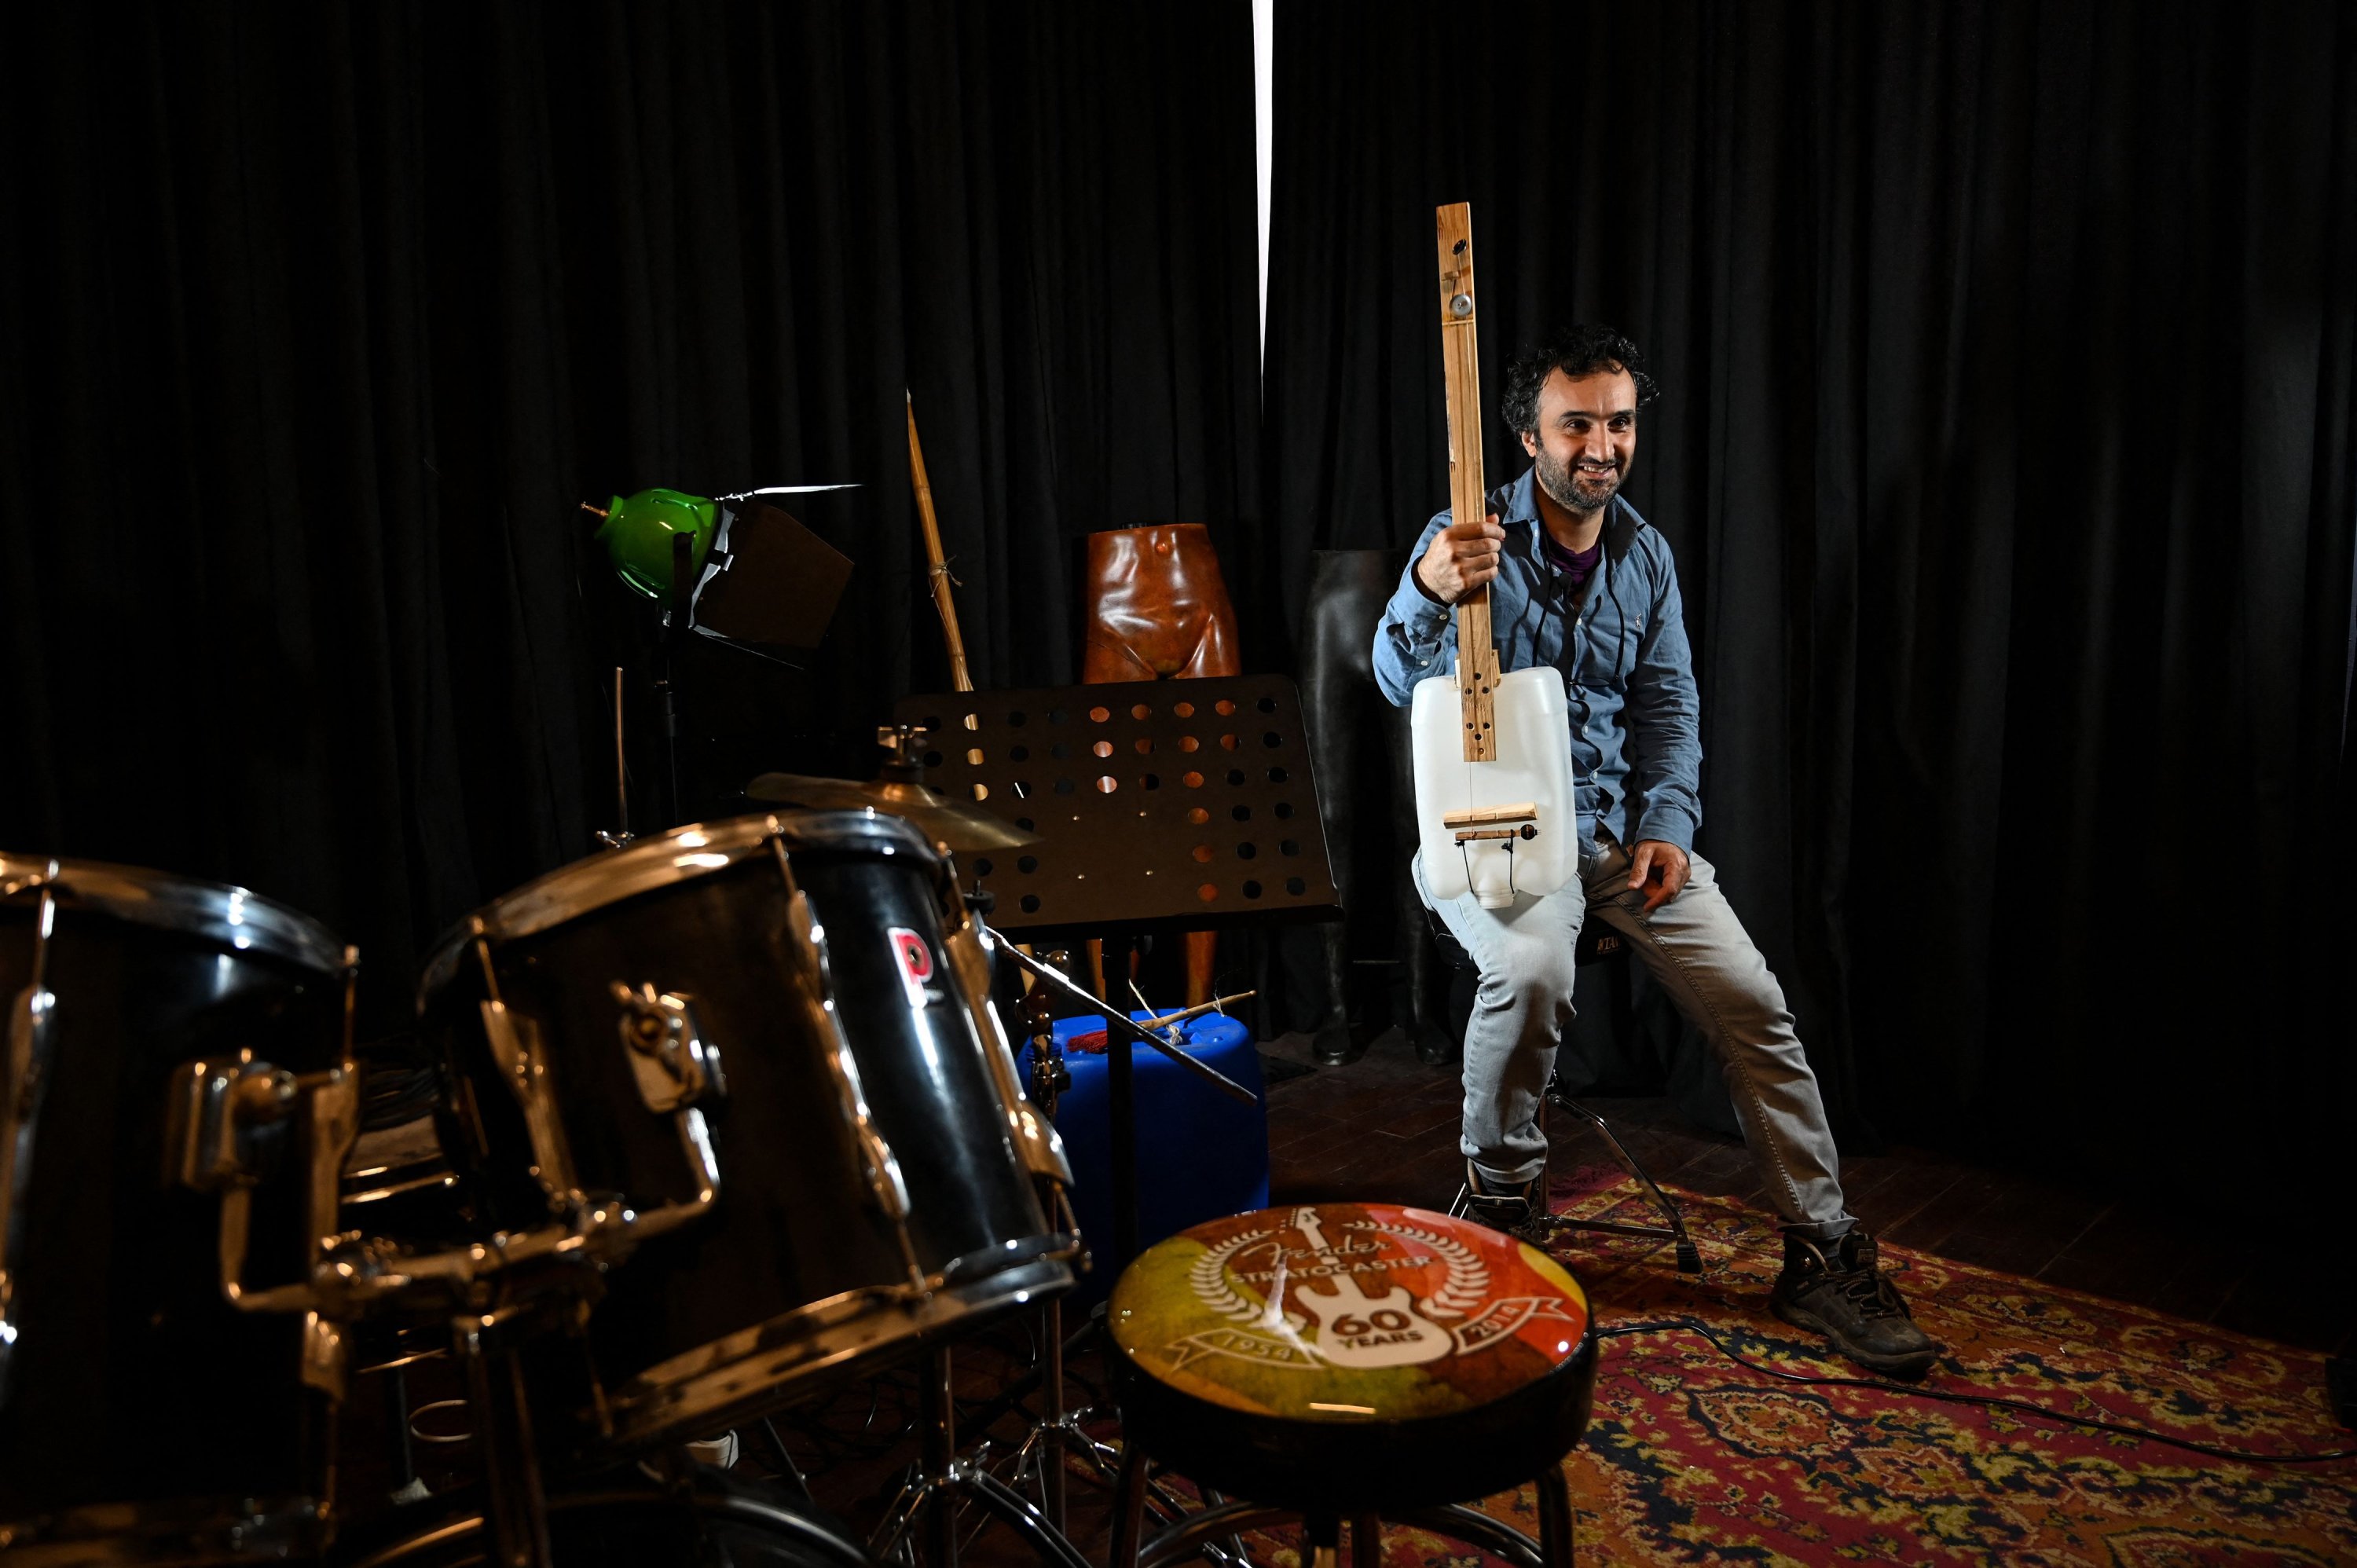 Fungistanbul band member Roni Aran poses as he prepares to perform with one of his instruments made with waste in Istanbul, Turkey, Nov. 8, 2021. (AFP Photo)